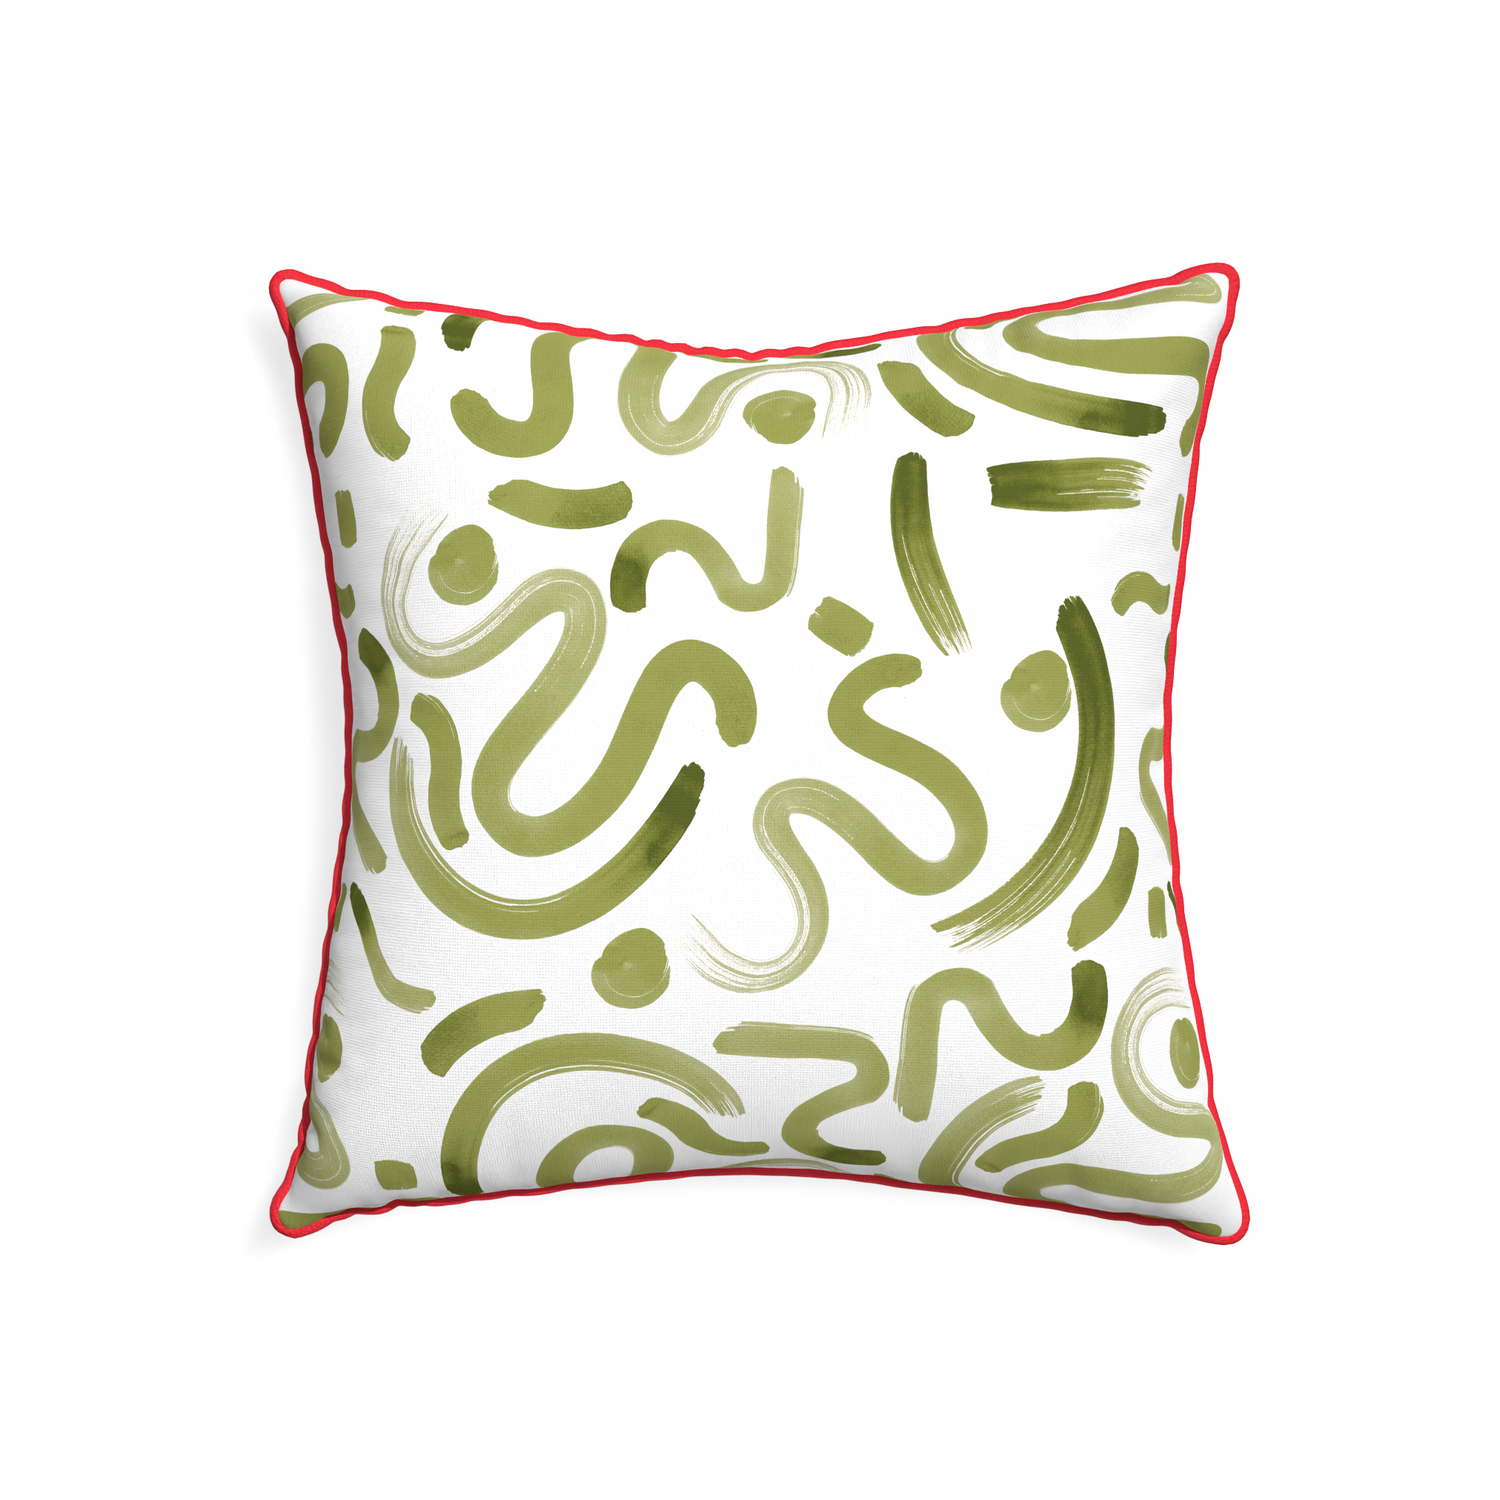 22-square hockney moss custom pillow with cherry piping on white background